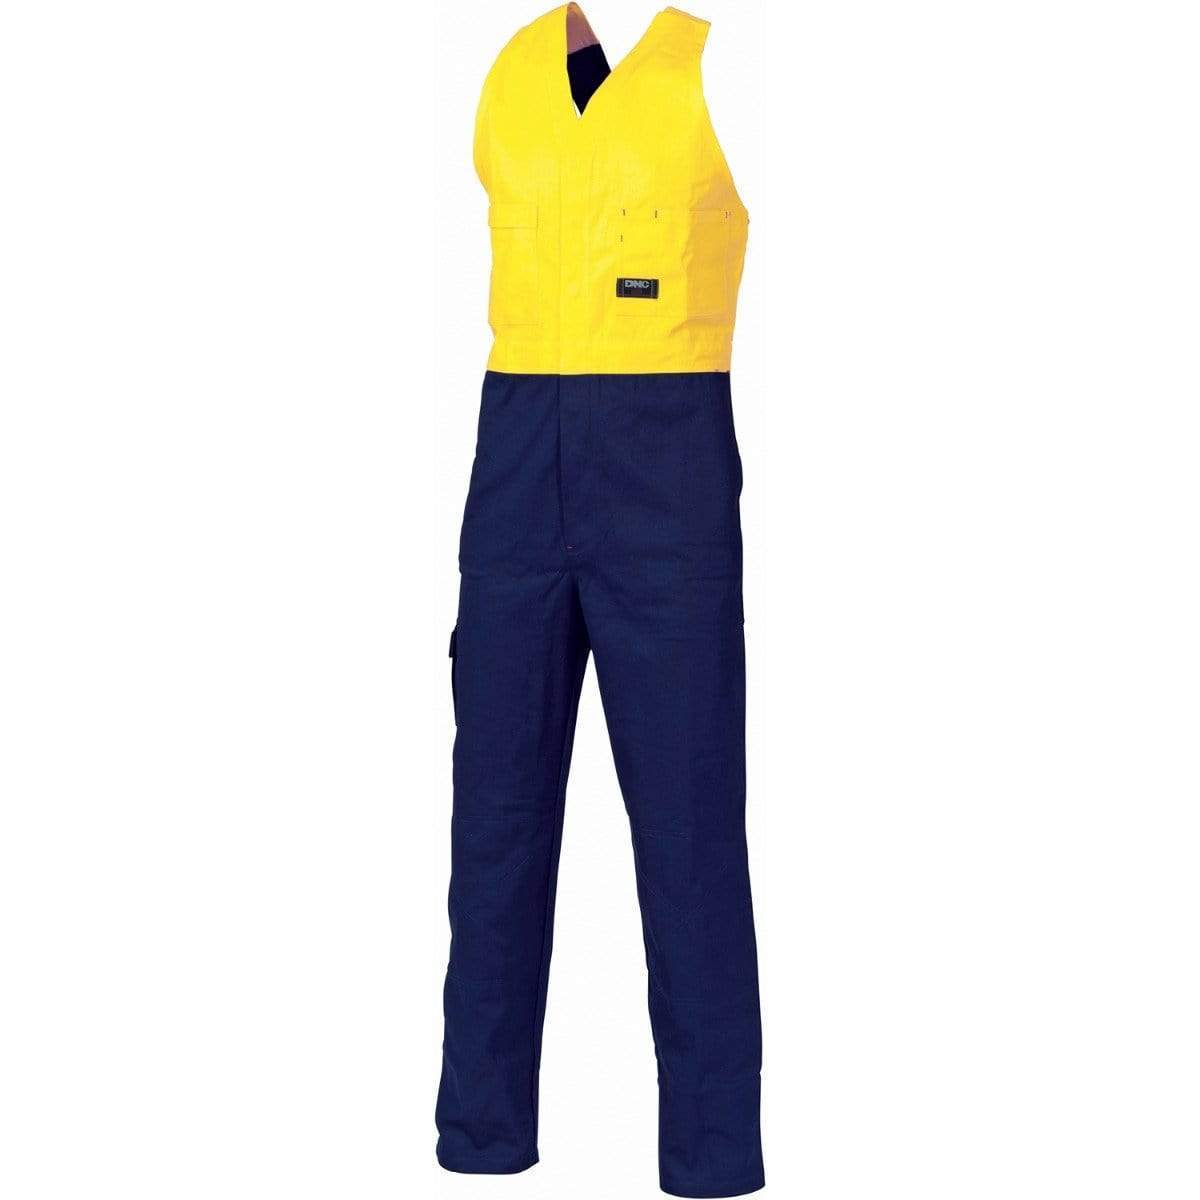 DNC Workwear Work Wear Yellow/Navy / 77R DNC WORKWEAR Hi-Vis Two-Tone Cotton Action Back Overall 3853